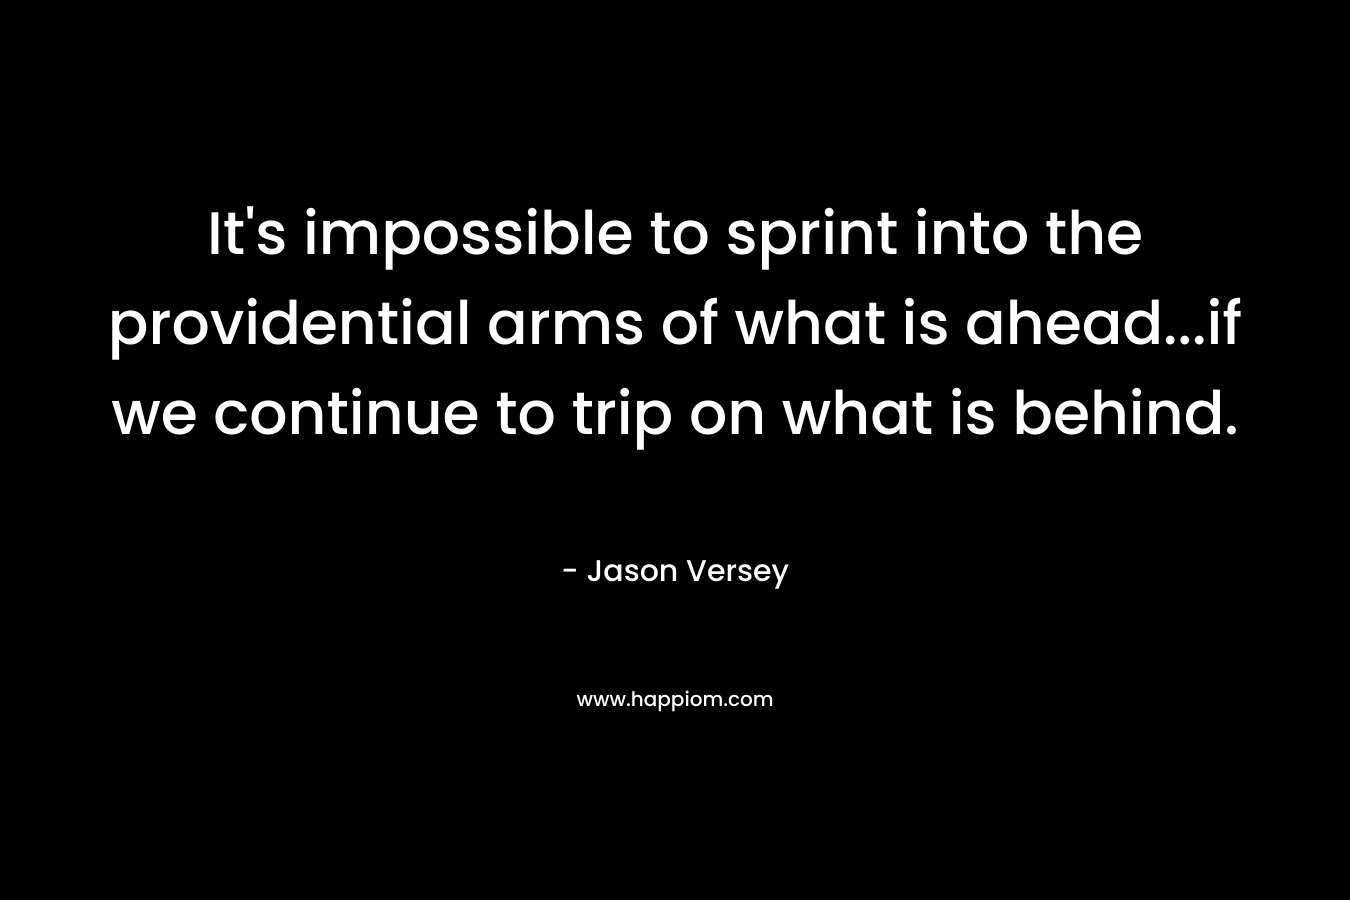 It's impossible to sprint into the providential arms of what is ahead...if we continue to trip on what is behind.